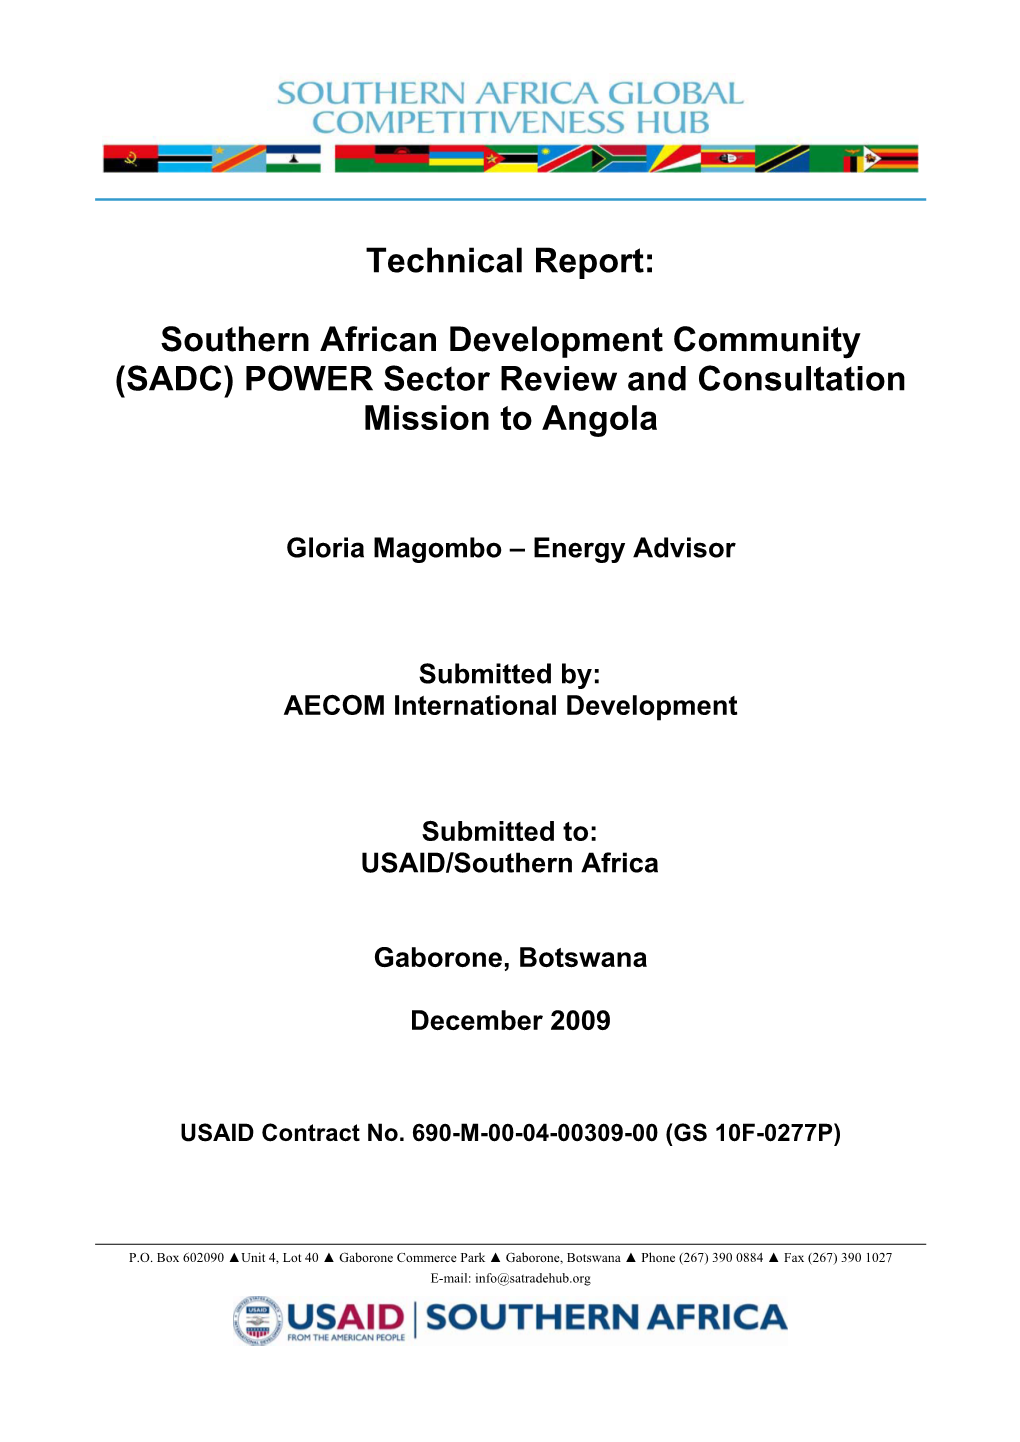 SADC) POWER Sector Review and Consultation Mission to Angola